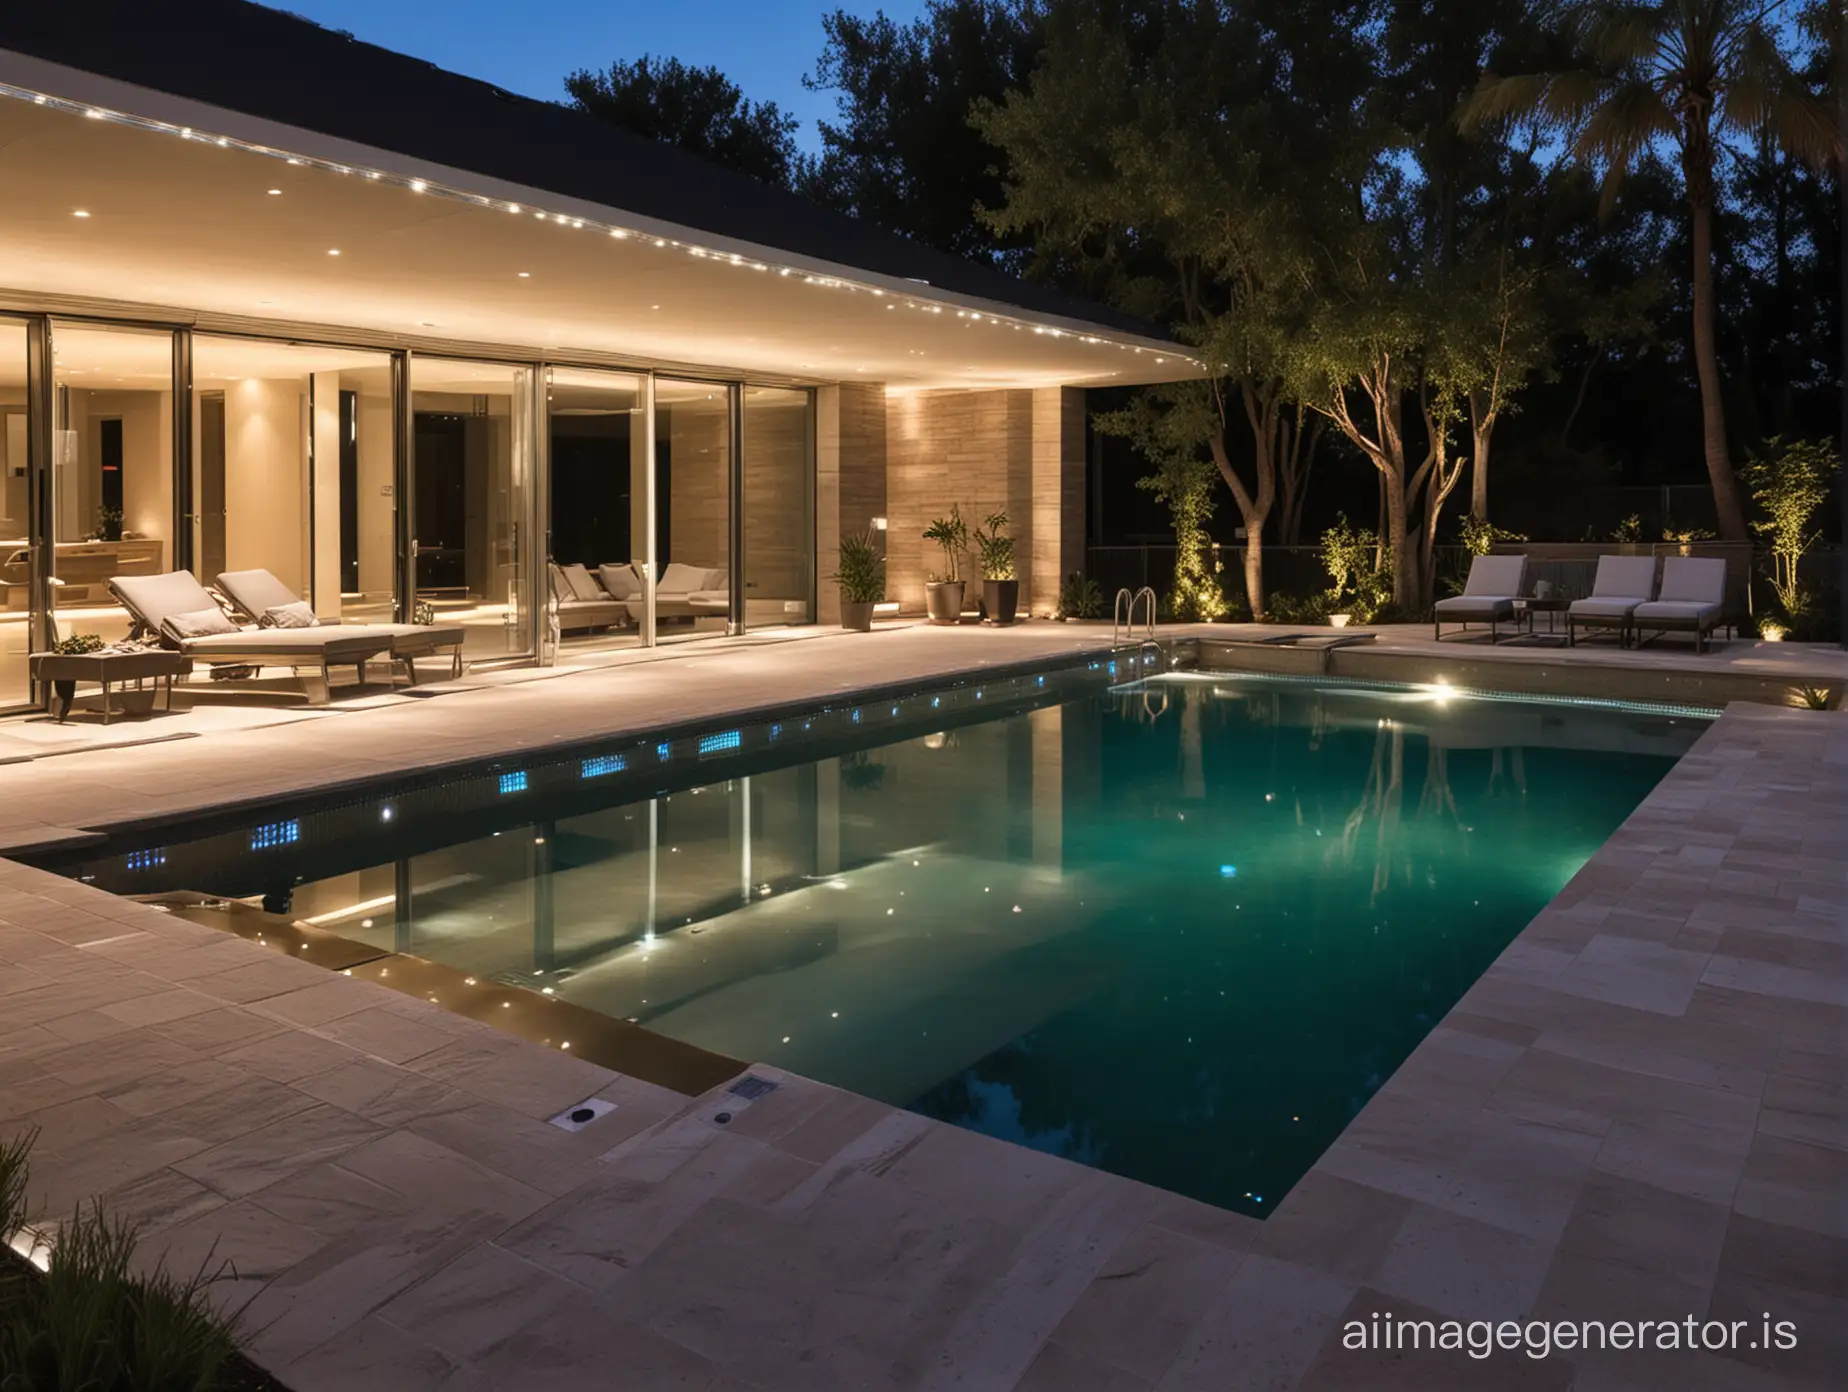 Advanced-Technology-Swimming-Pool-with-Temperature-Control-and-LED-Lighting